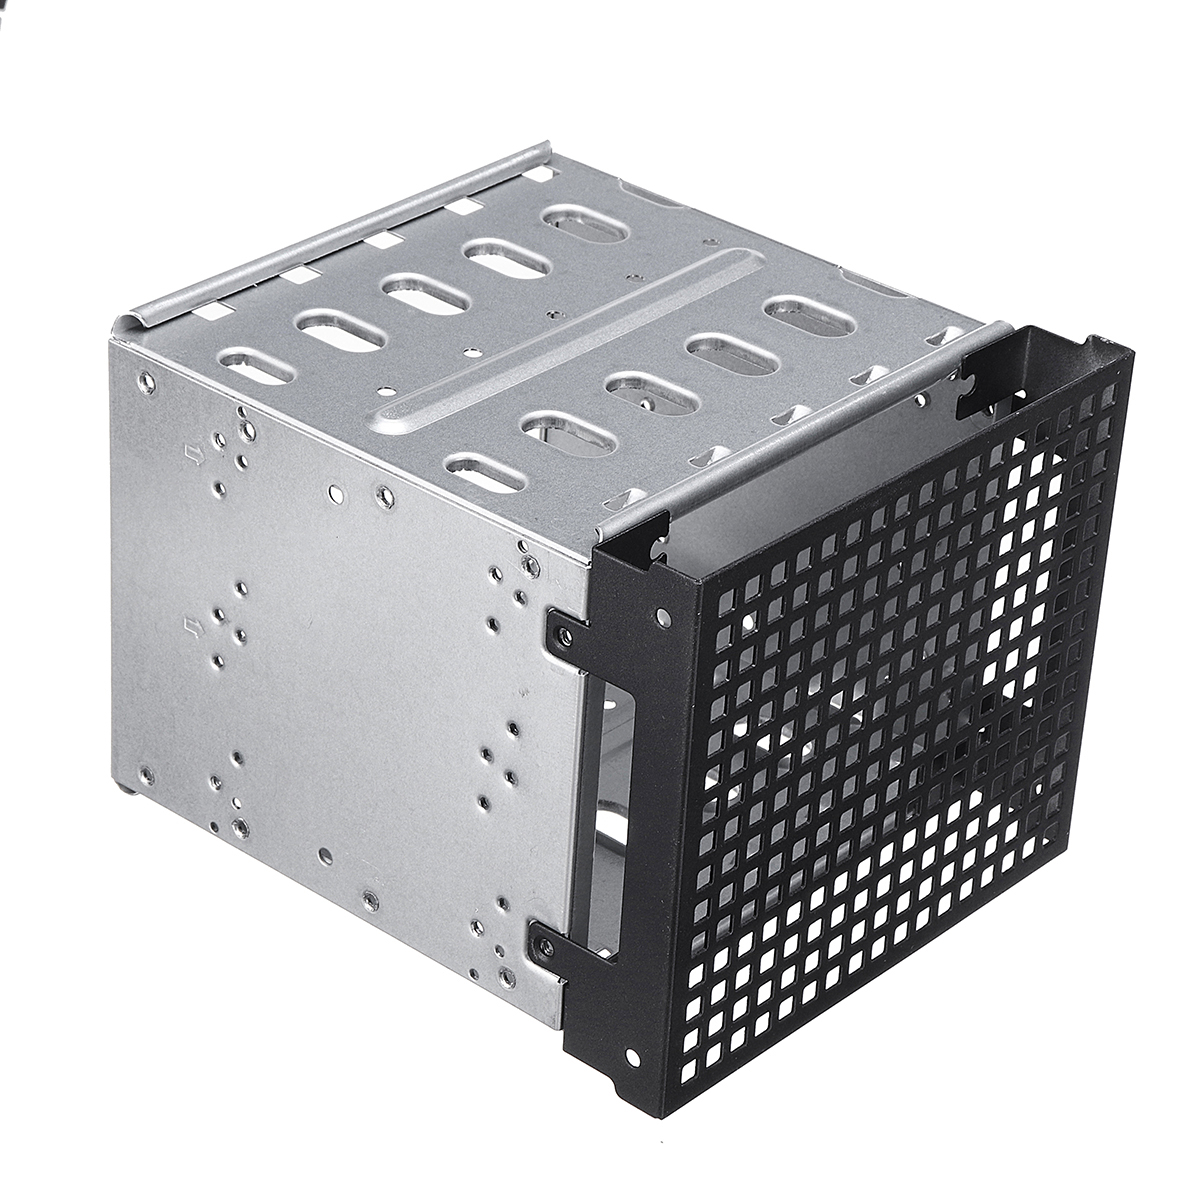 5.25" to 5x 3.5" SATA SAS HDD Cage Rack Hard Drive Tray Caddy Converter with Fan Space 56